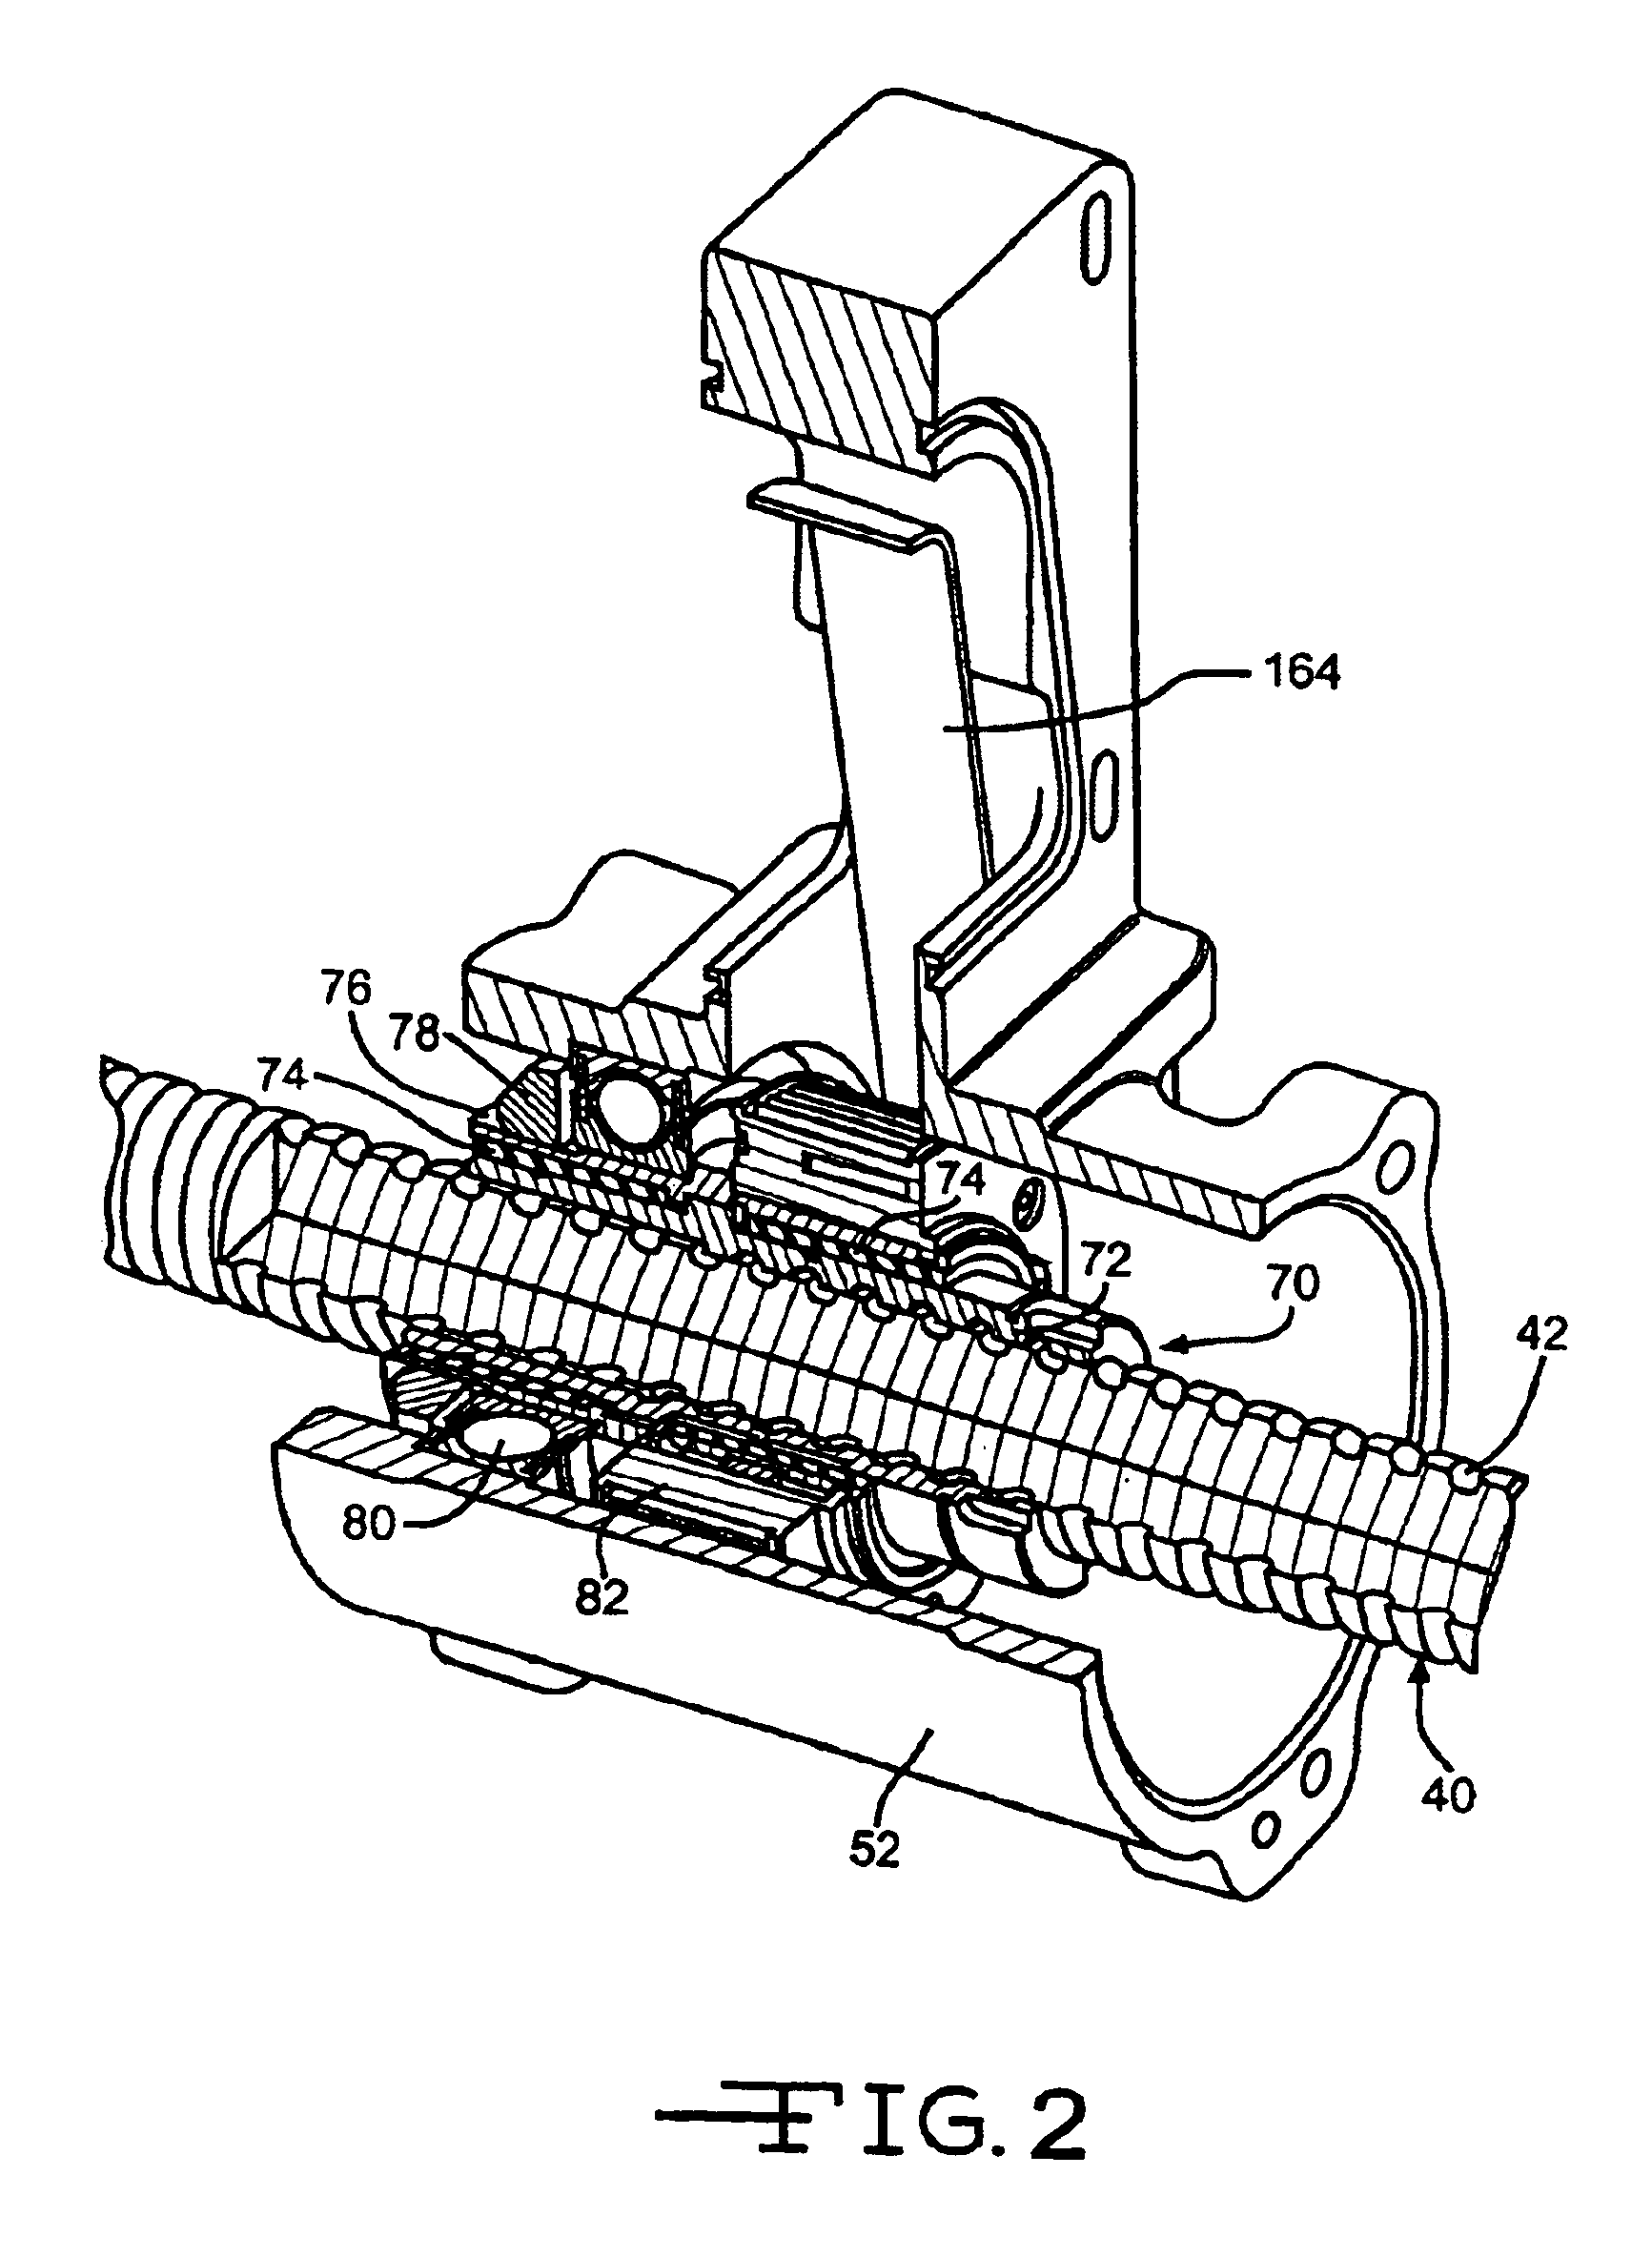 Electric power steering assembly